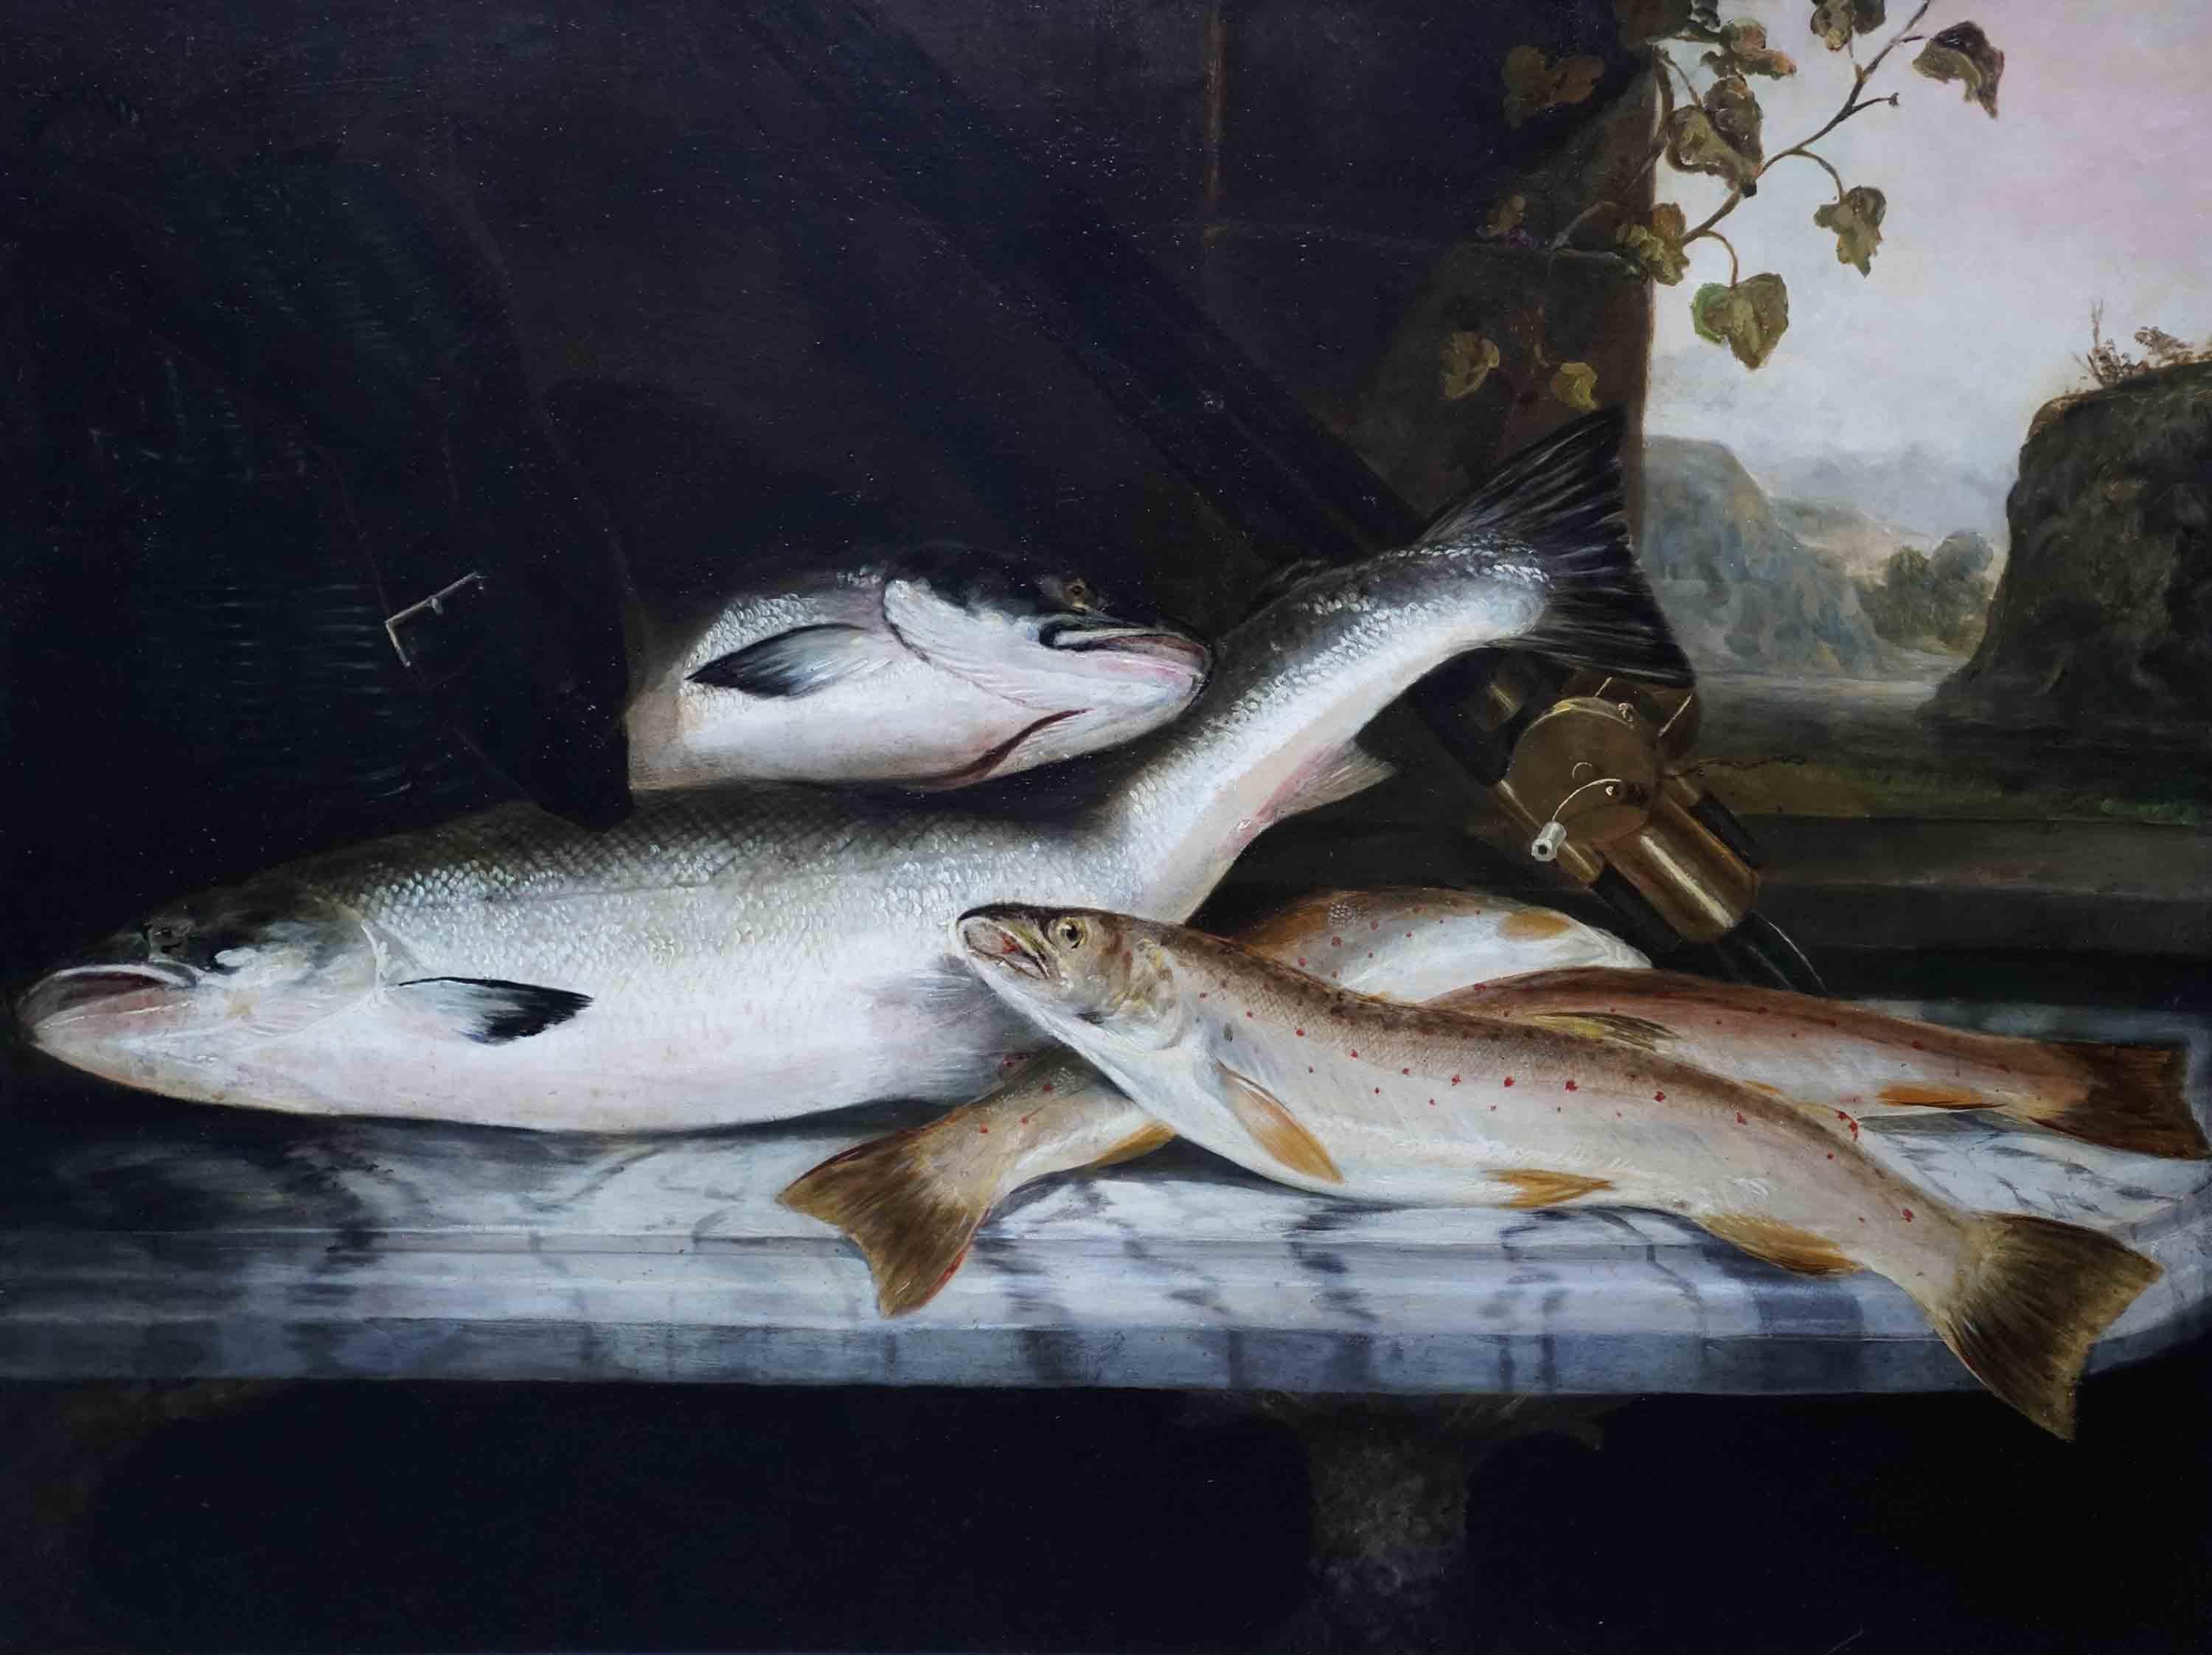 Angling Still Life of Fish - British Edwardian art 1910 oil painting fishing  For Sale 4